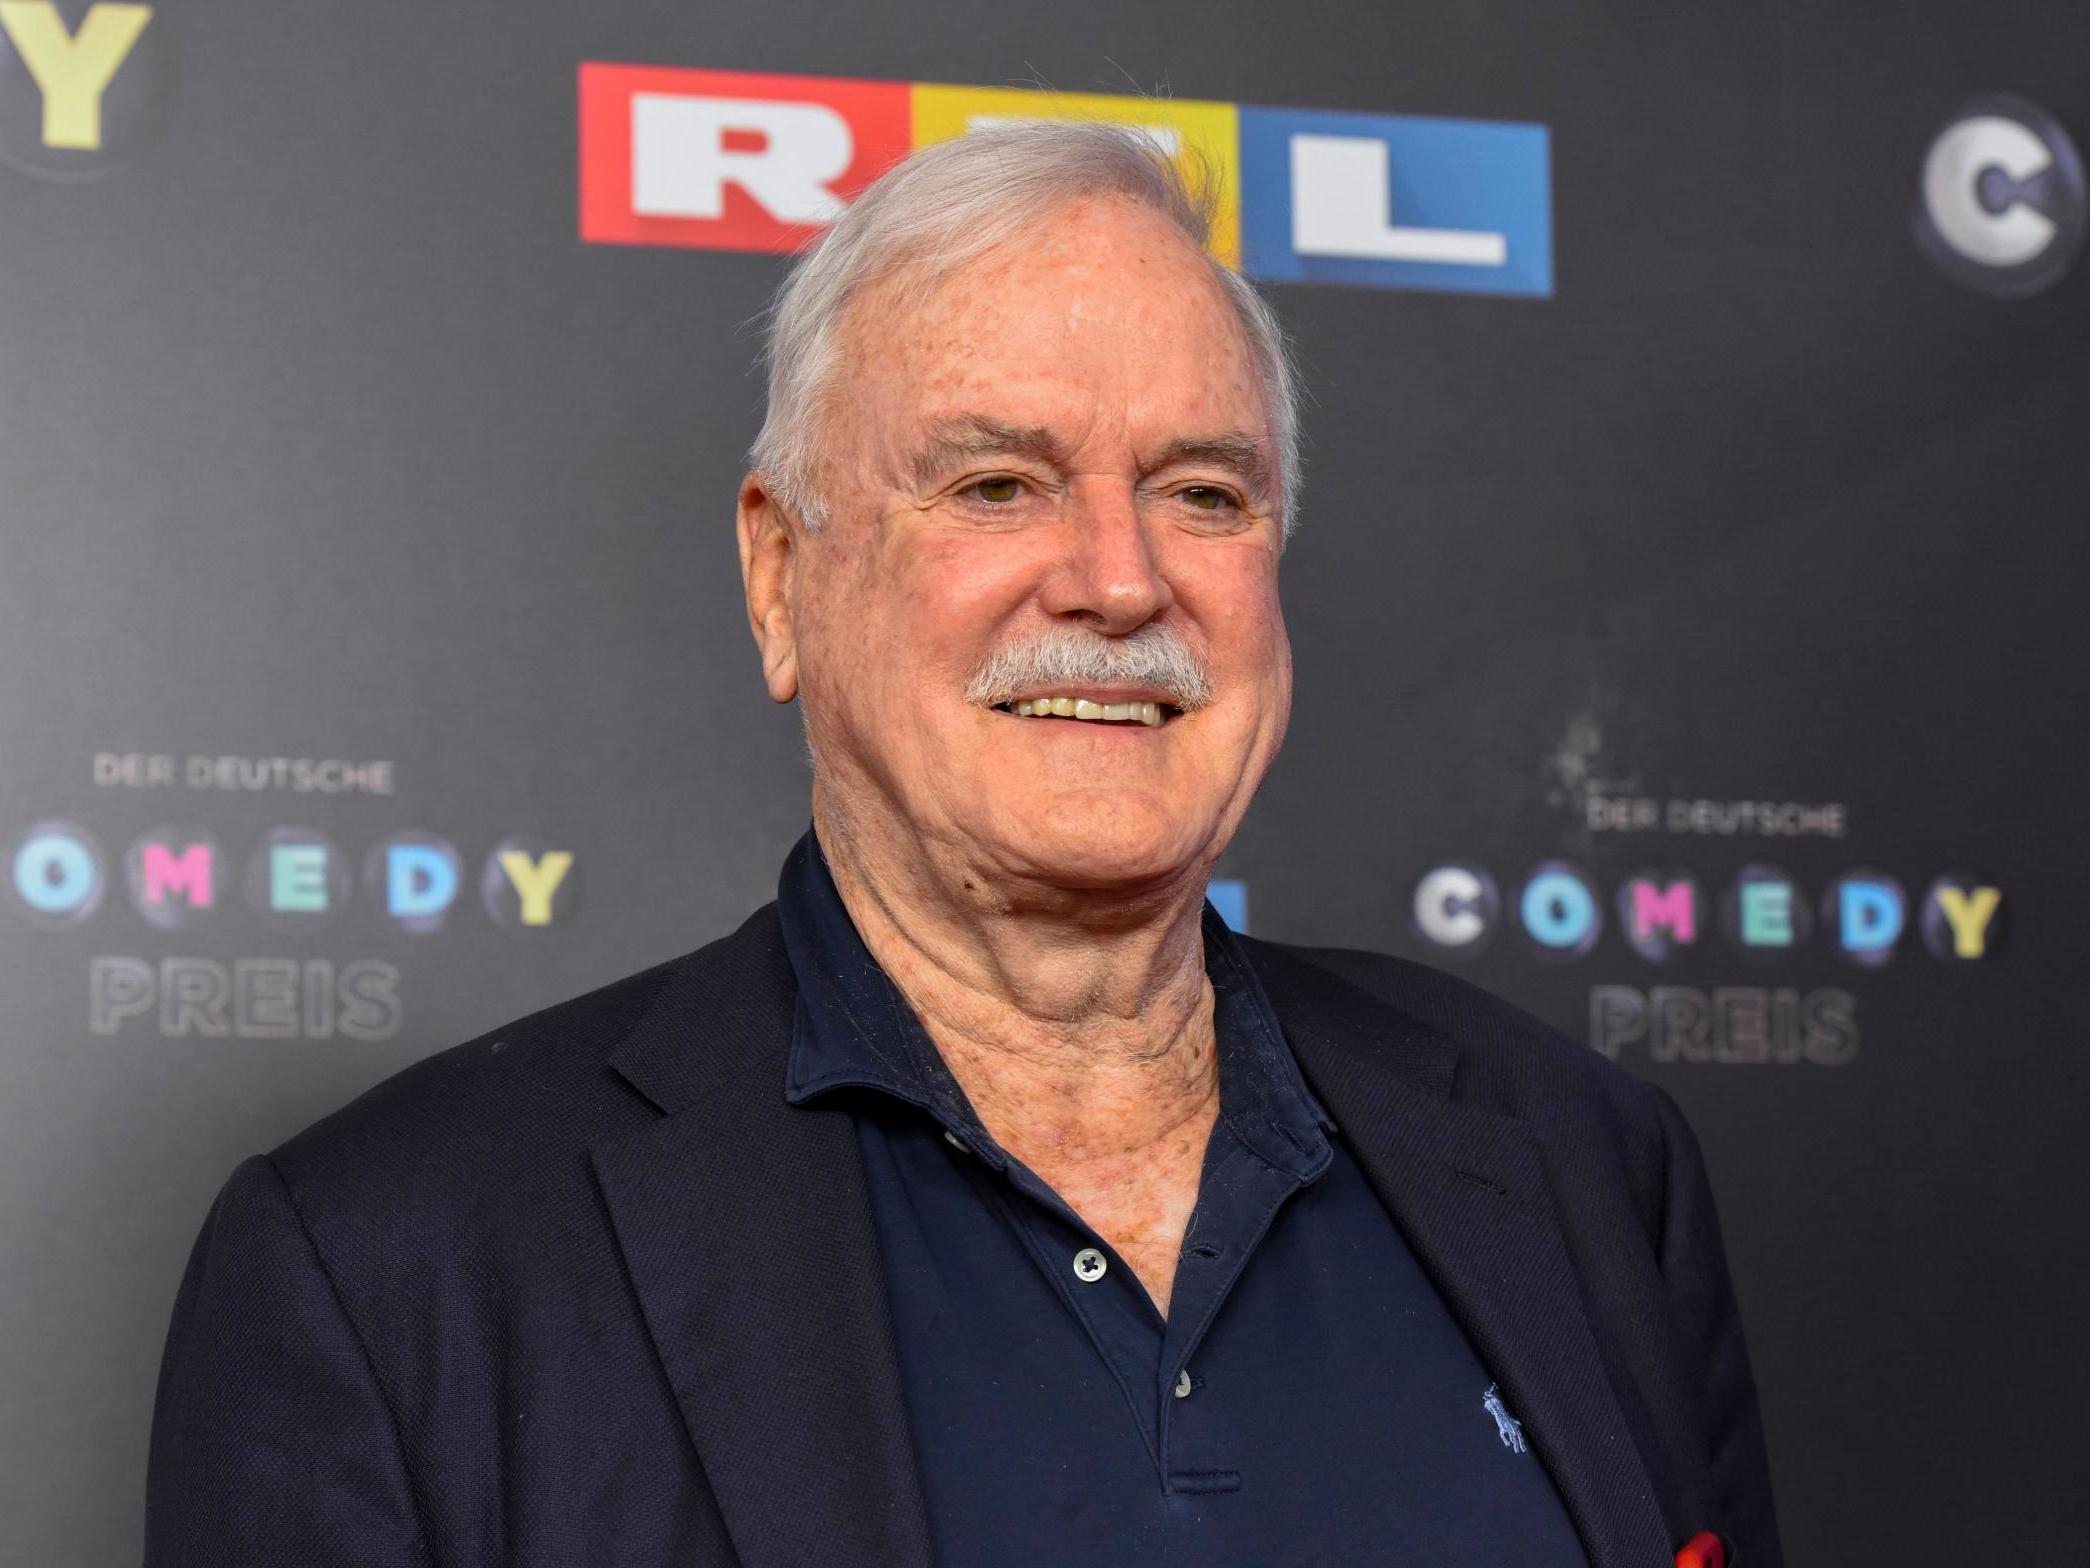 John Cleese accused of transphobia after defending JK Rowling indy100